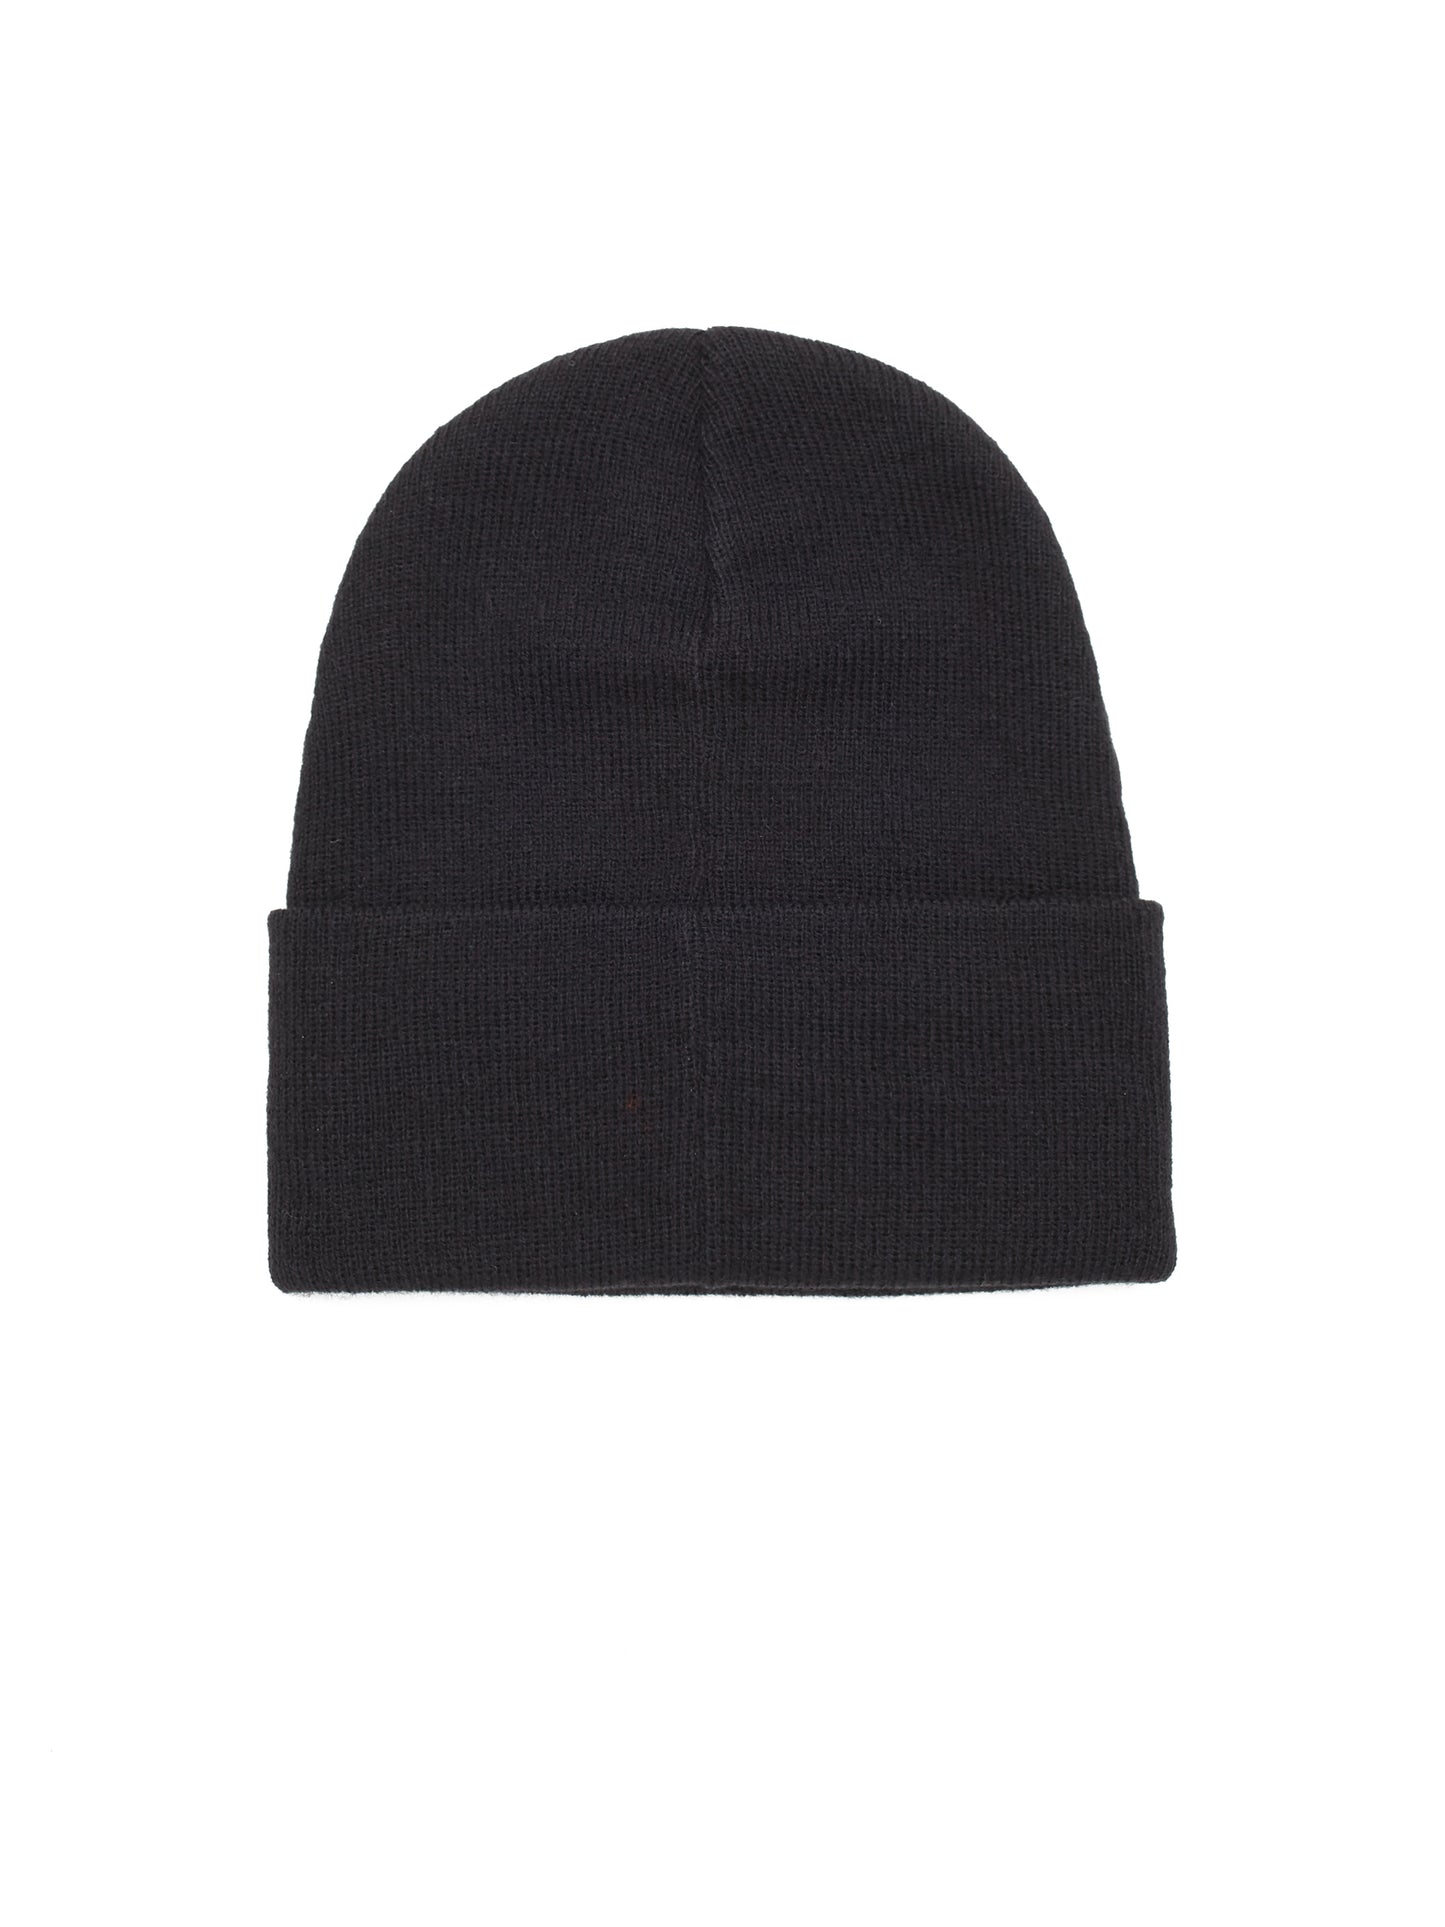 OBEY - Records Beanie, Black